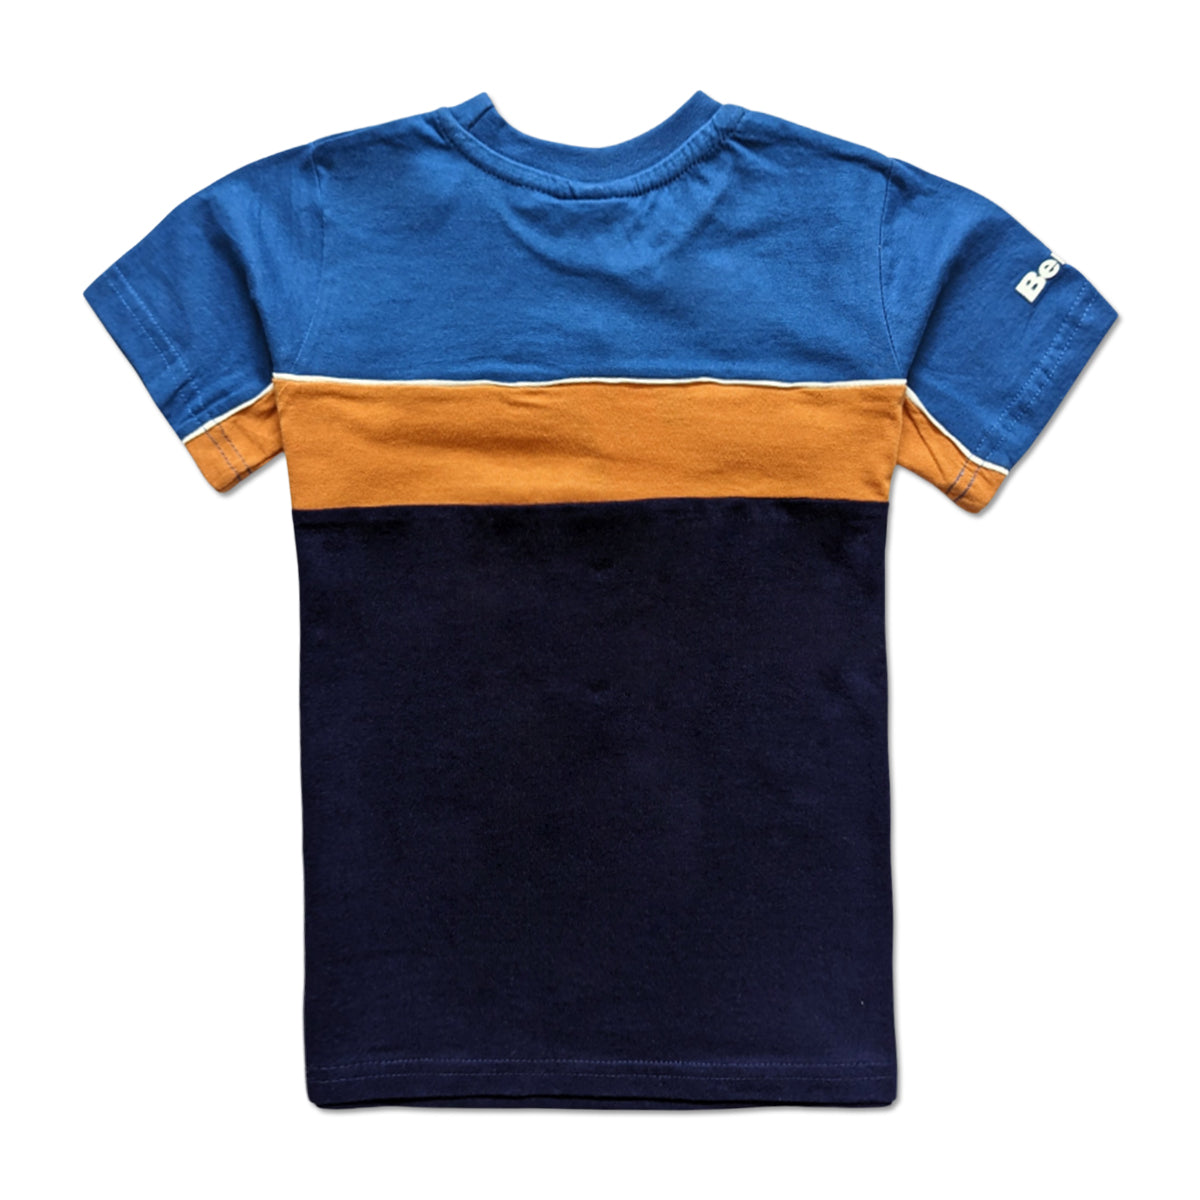 Boys Color Block T-Shirt with Bench Logo in Blue and Mustard